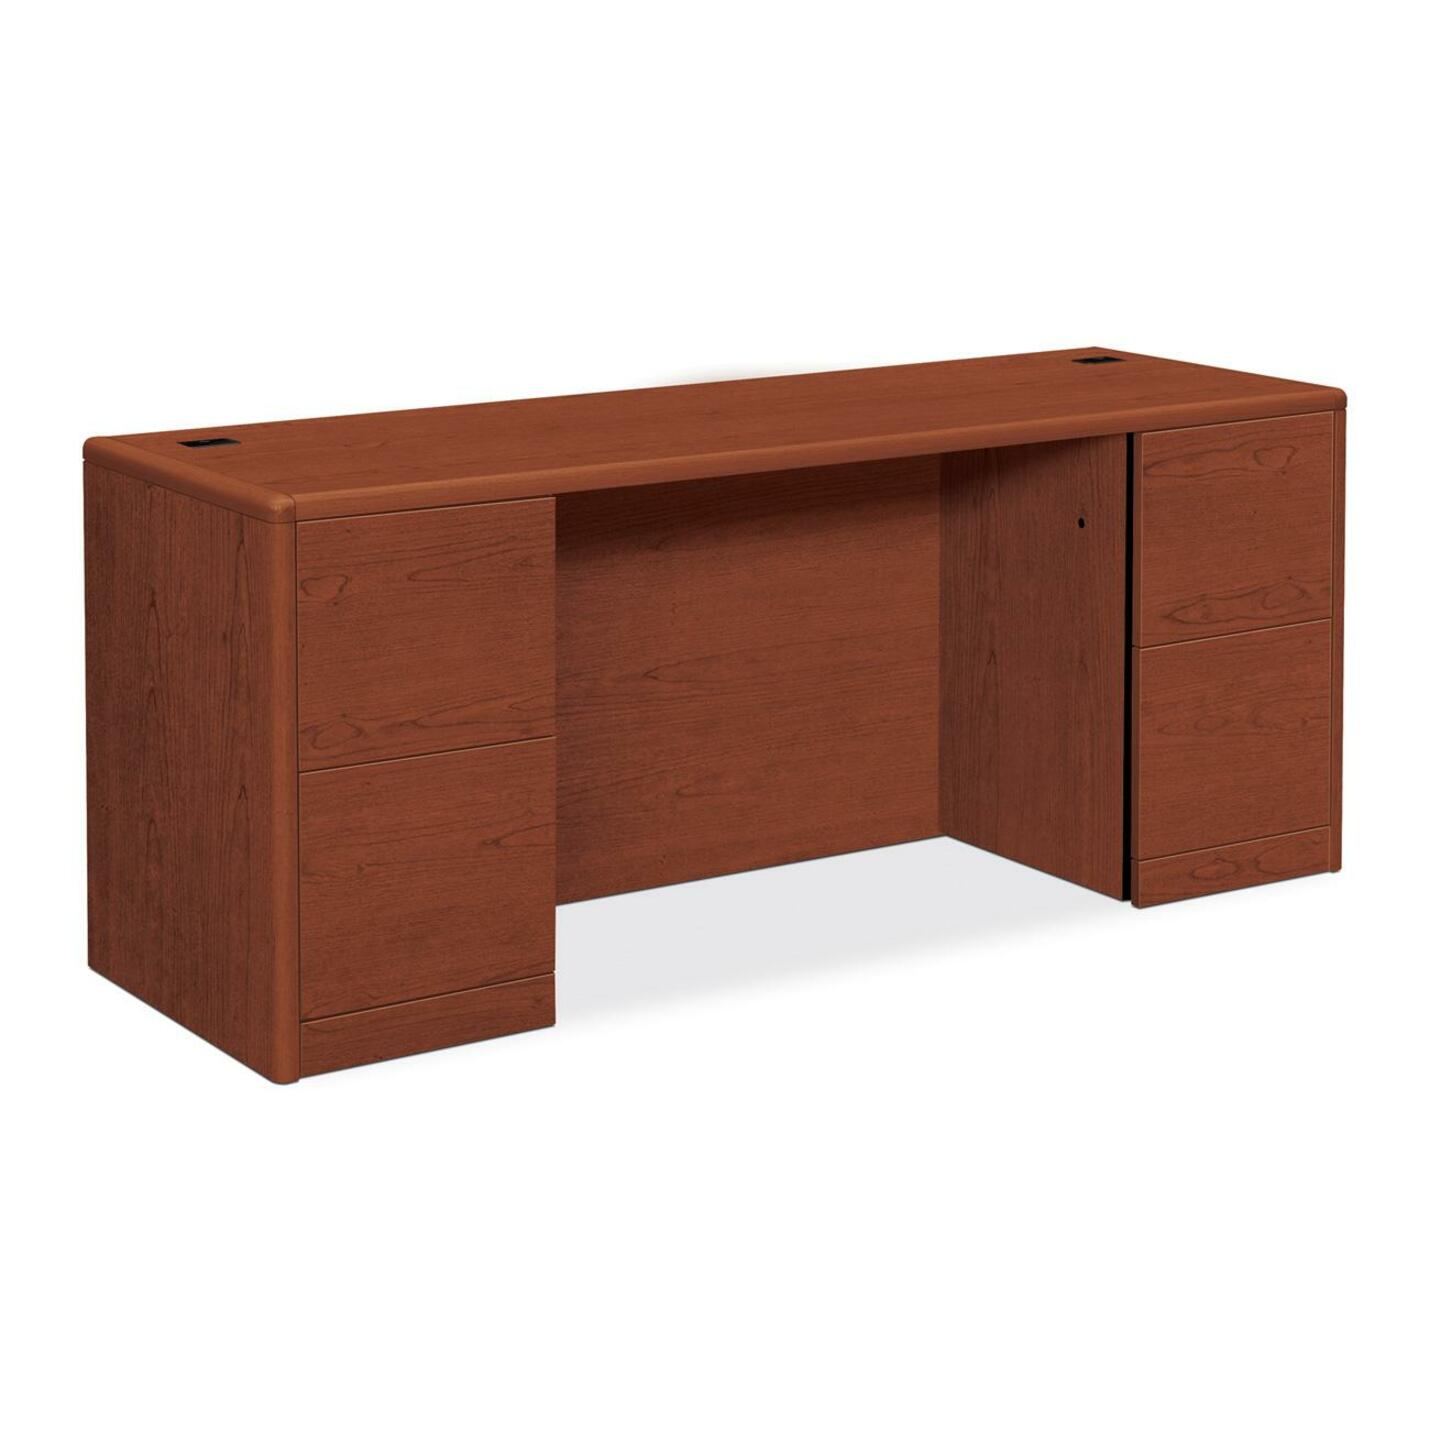 HON 10700 Series Kneespace Credenza, 4-Drawer - image 1 of 3